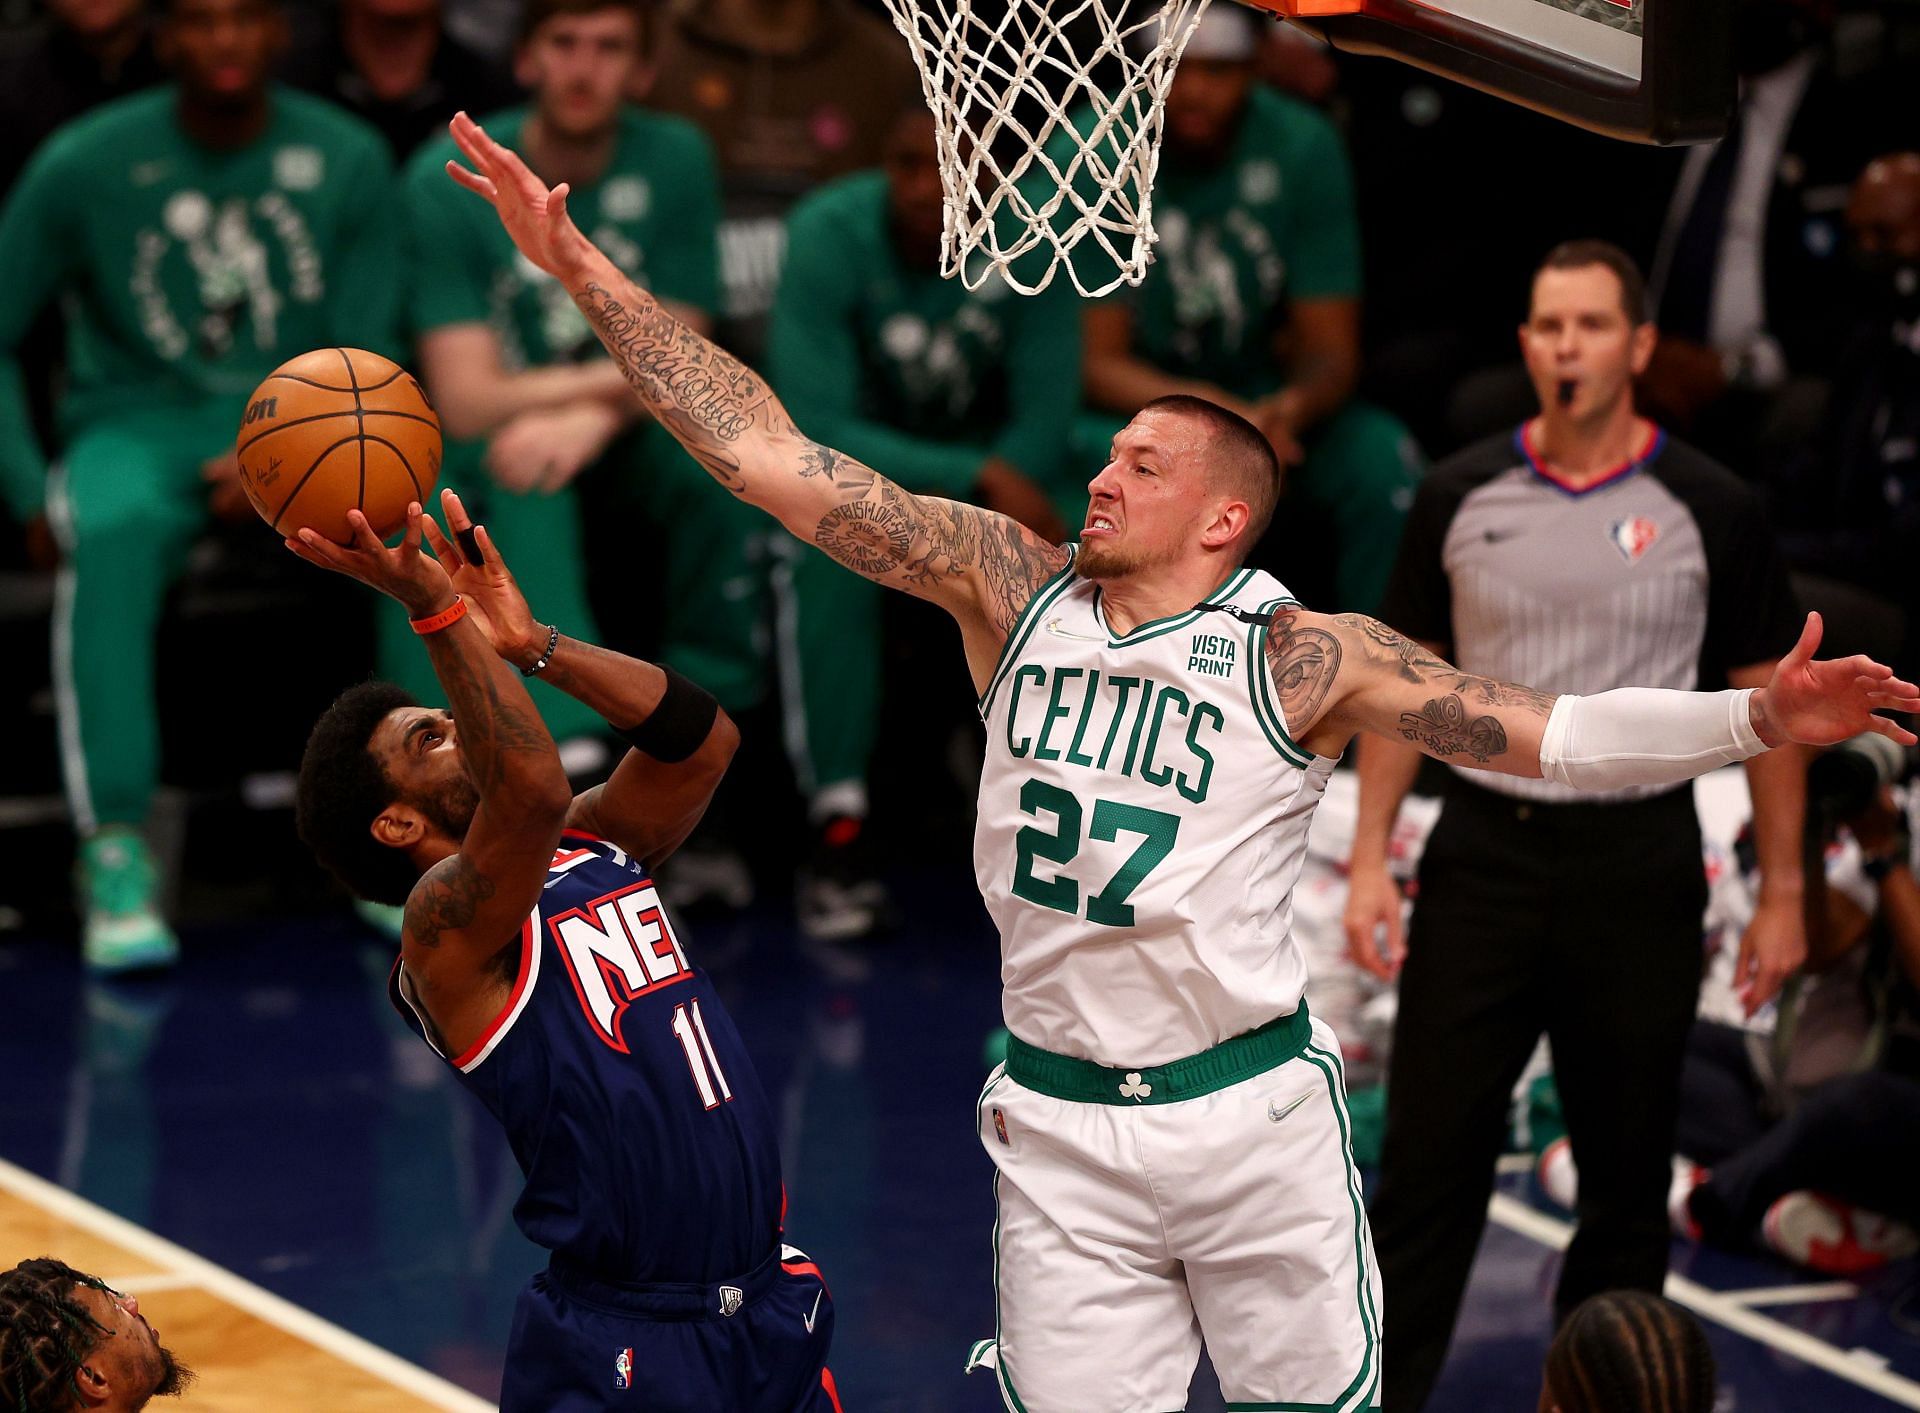 Kyrie Irving of the Brooklyn Nets heads for the net as Daniel Theis of the Boston Celtics defends.